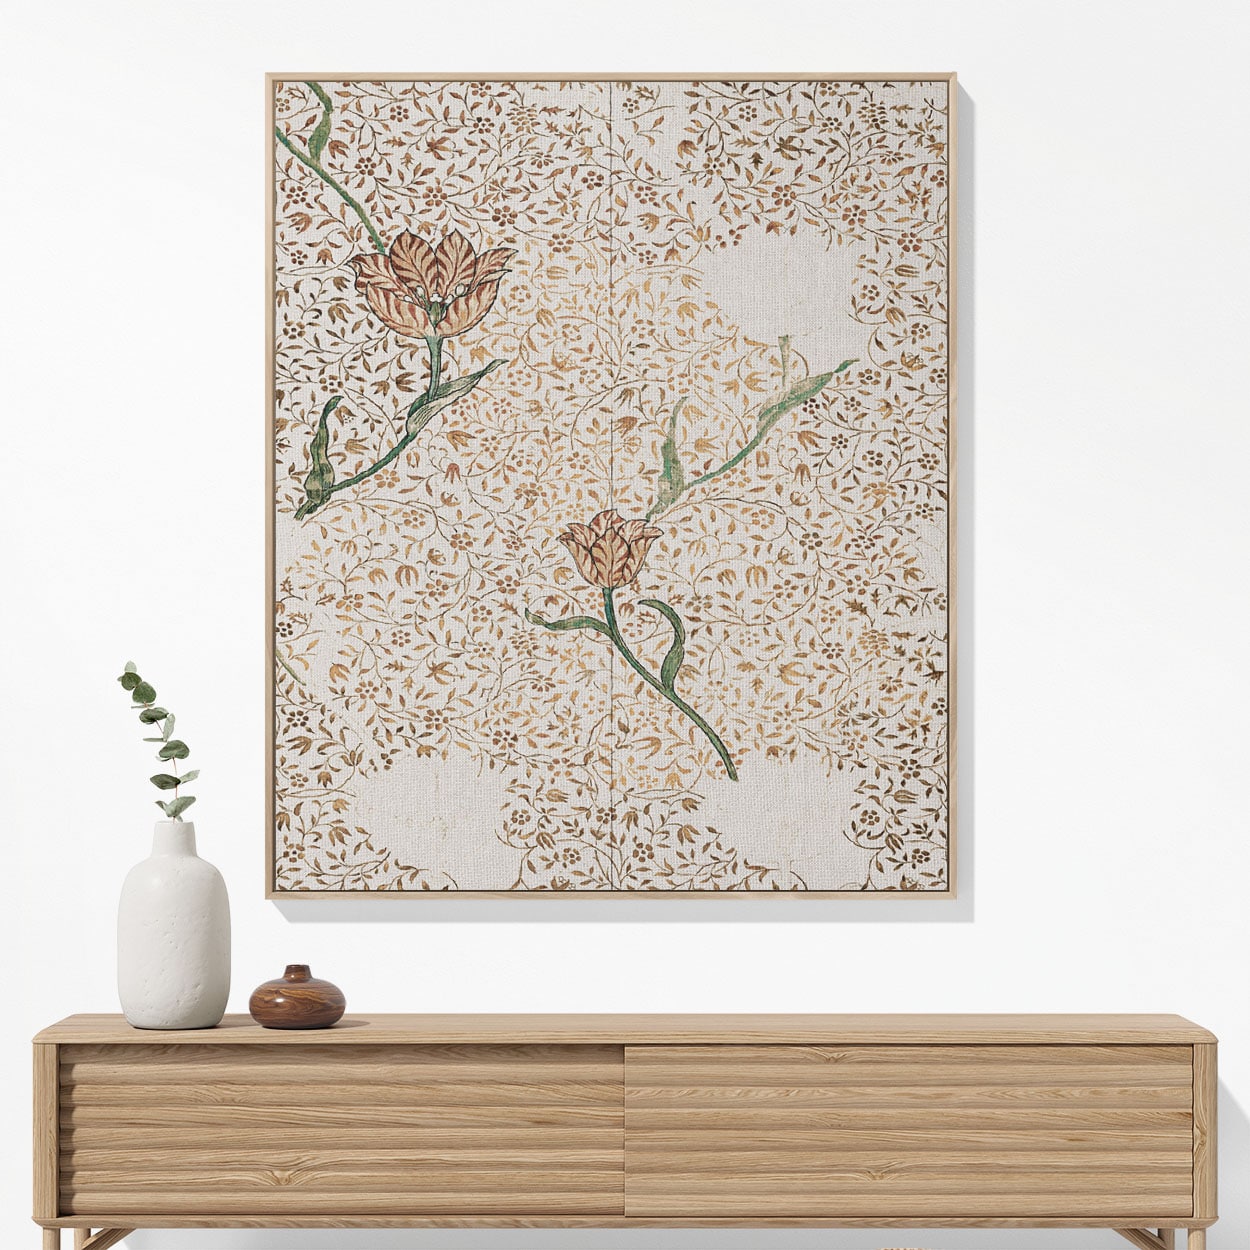 Aesthetic Floral Woven Blanket Woven Blanket Hanging on a Wall as Framed Wall Art